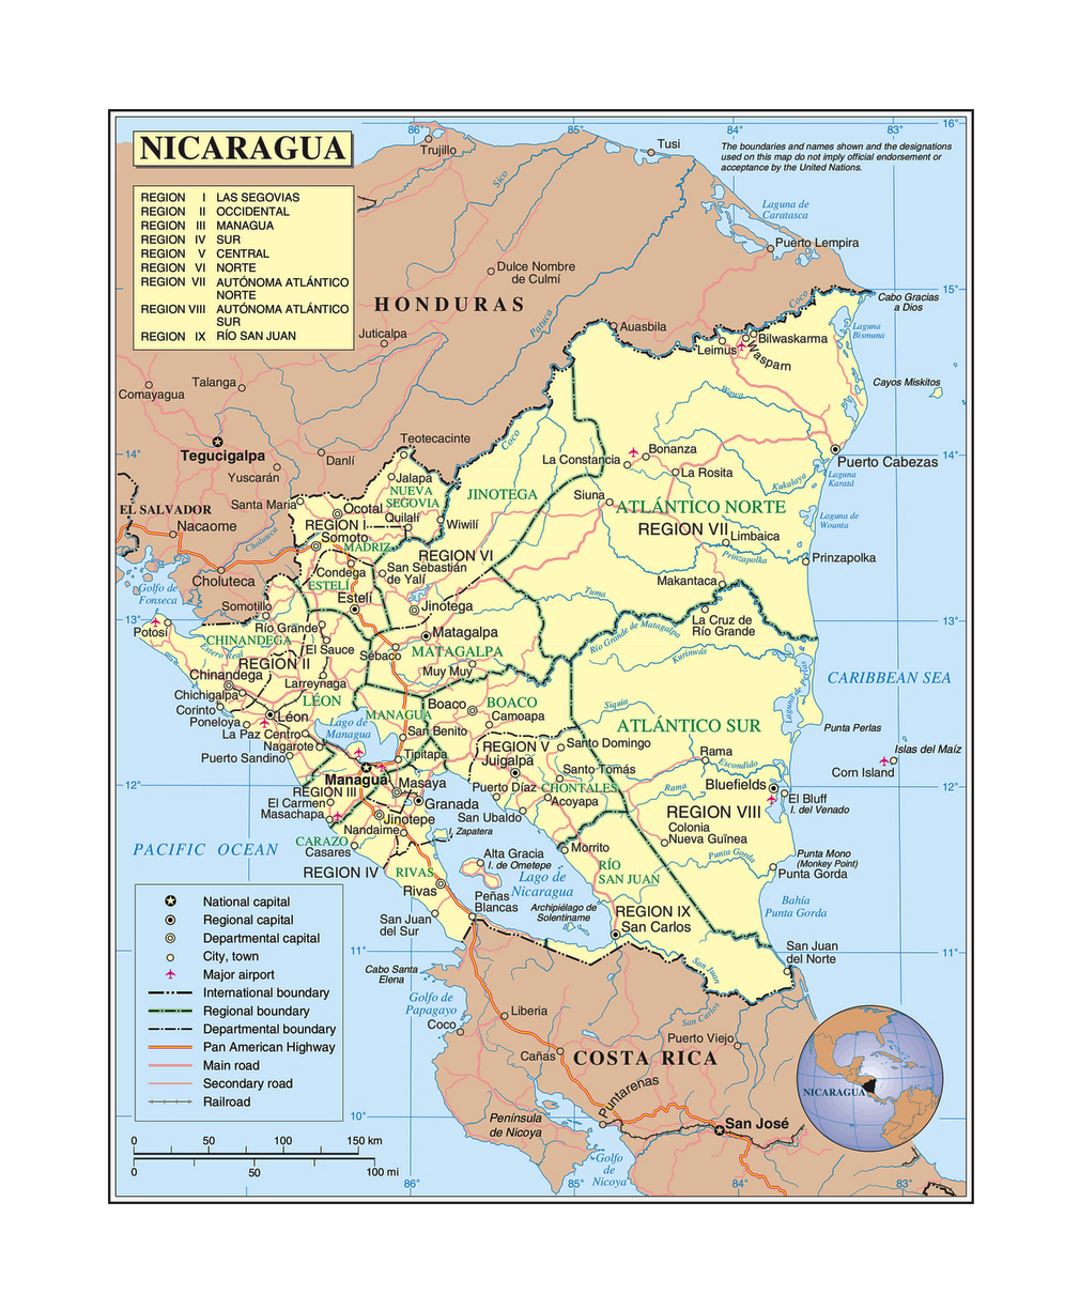 Detailed political and administrative map of Nicaragua with roads, railroads, cities and airports